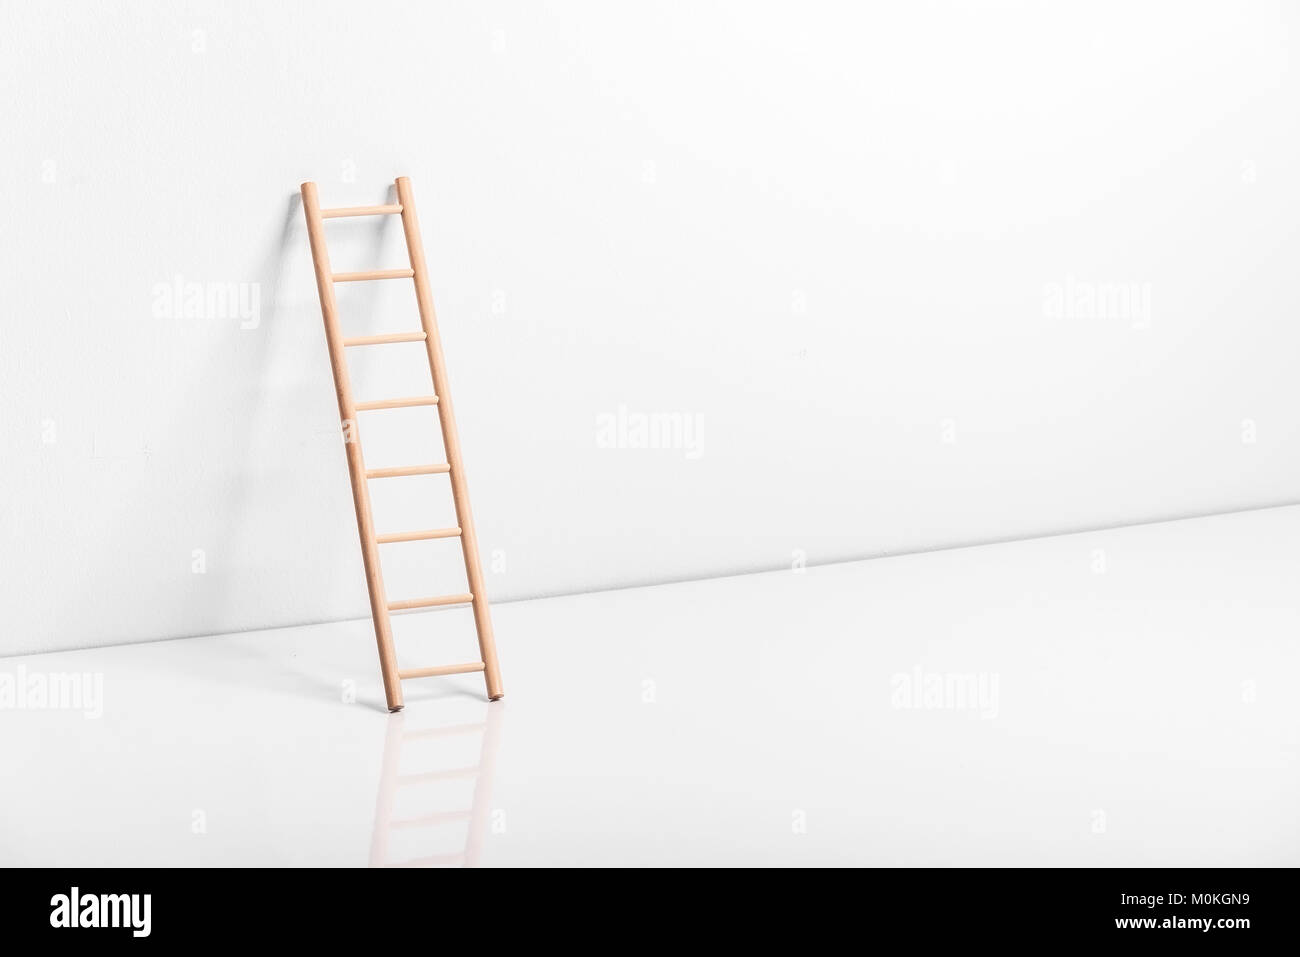 Two ladders are leaning against a wall in such a way that they